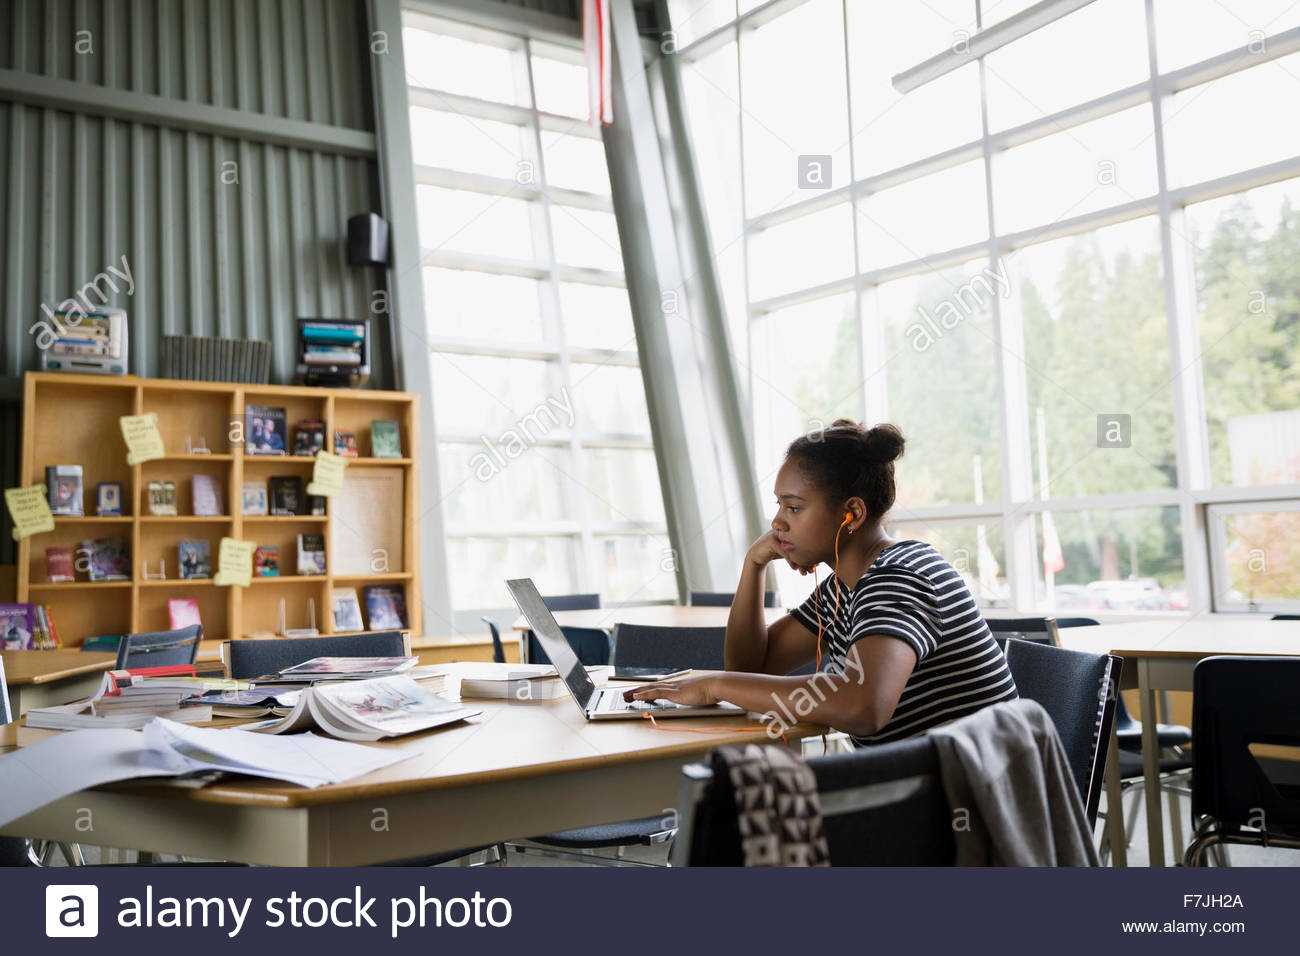 Focused high school student studying at laptop library Stock Photo